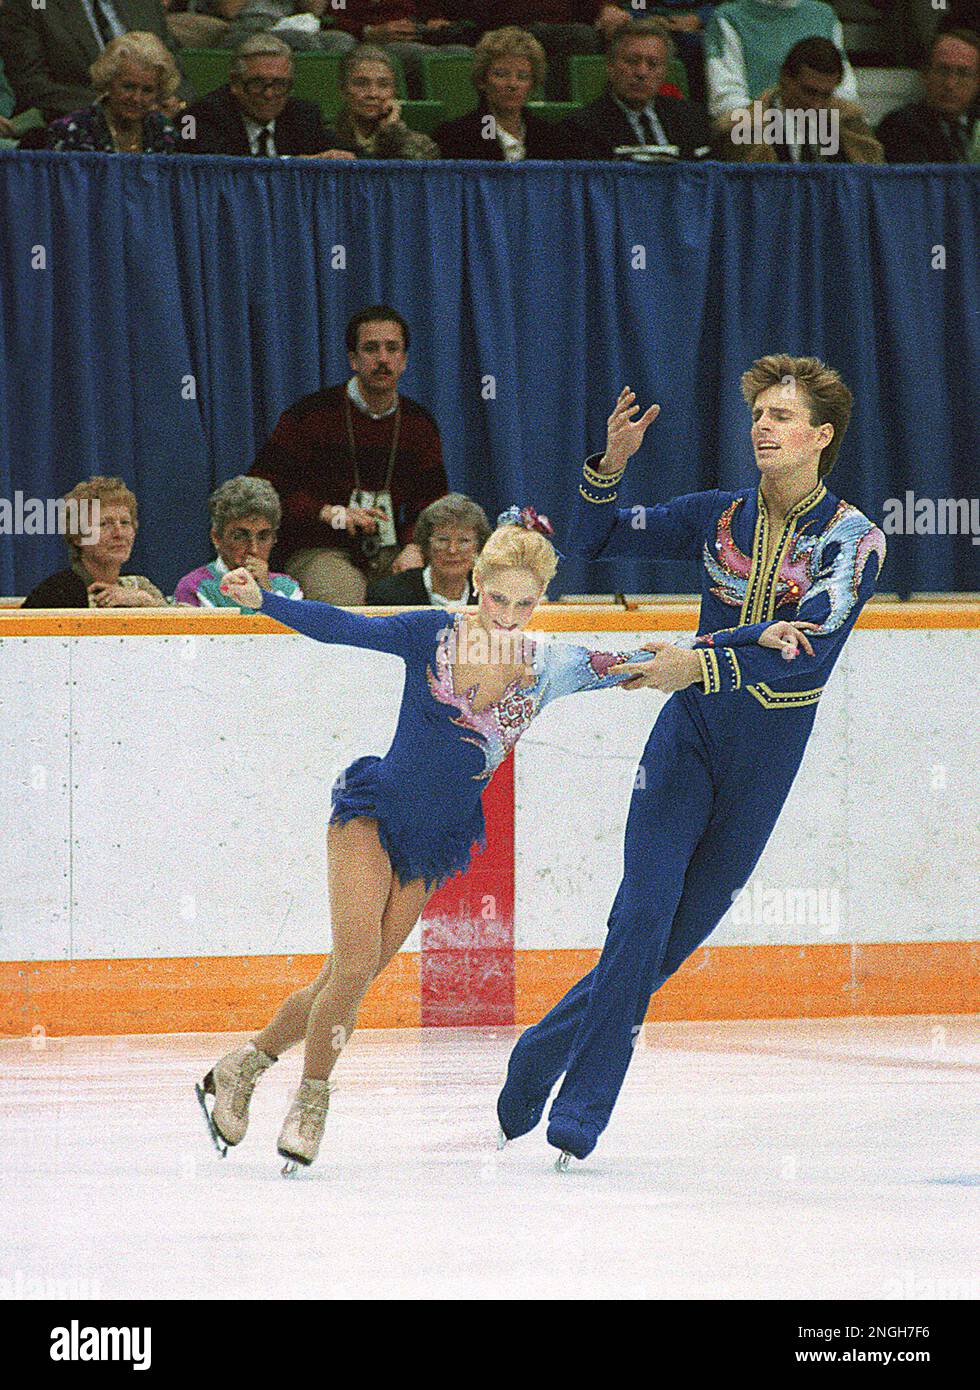 Peter Oppegard of Knoxville, Tenn., holds Jill Watson of Bloomington, Ind., as they skate to the music in the Olympic night pairs figure skating at Calgary, Canada. The pair gave the United States its first medal of the XV Winter Olympics by winning the bronze medals. (AP Photo/Massimo Sambucetti) Stock Photo